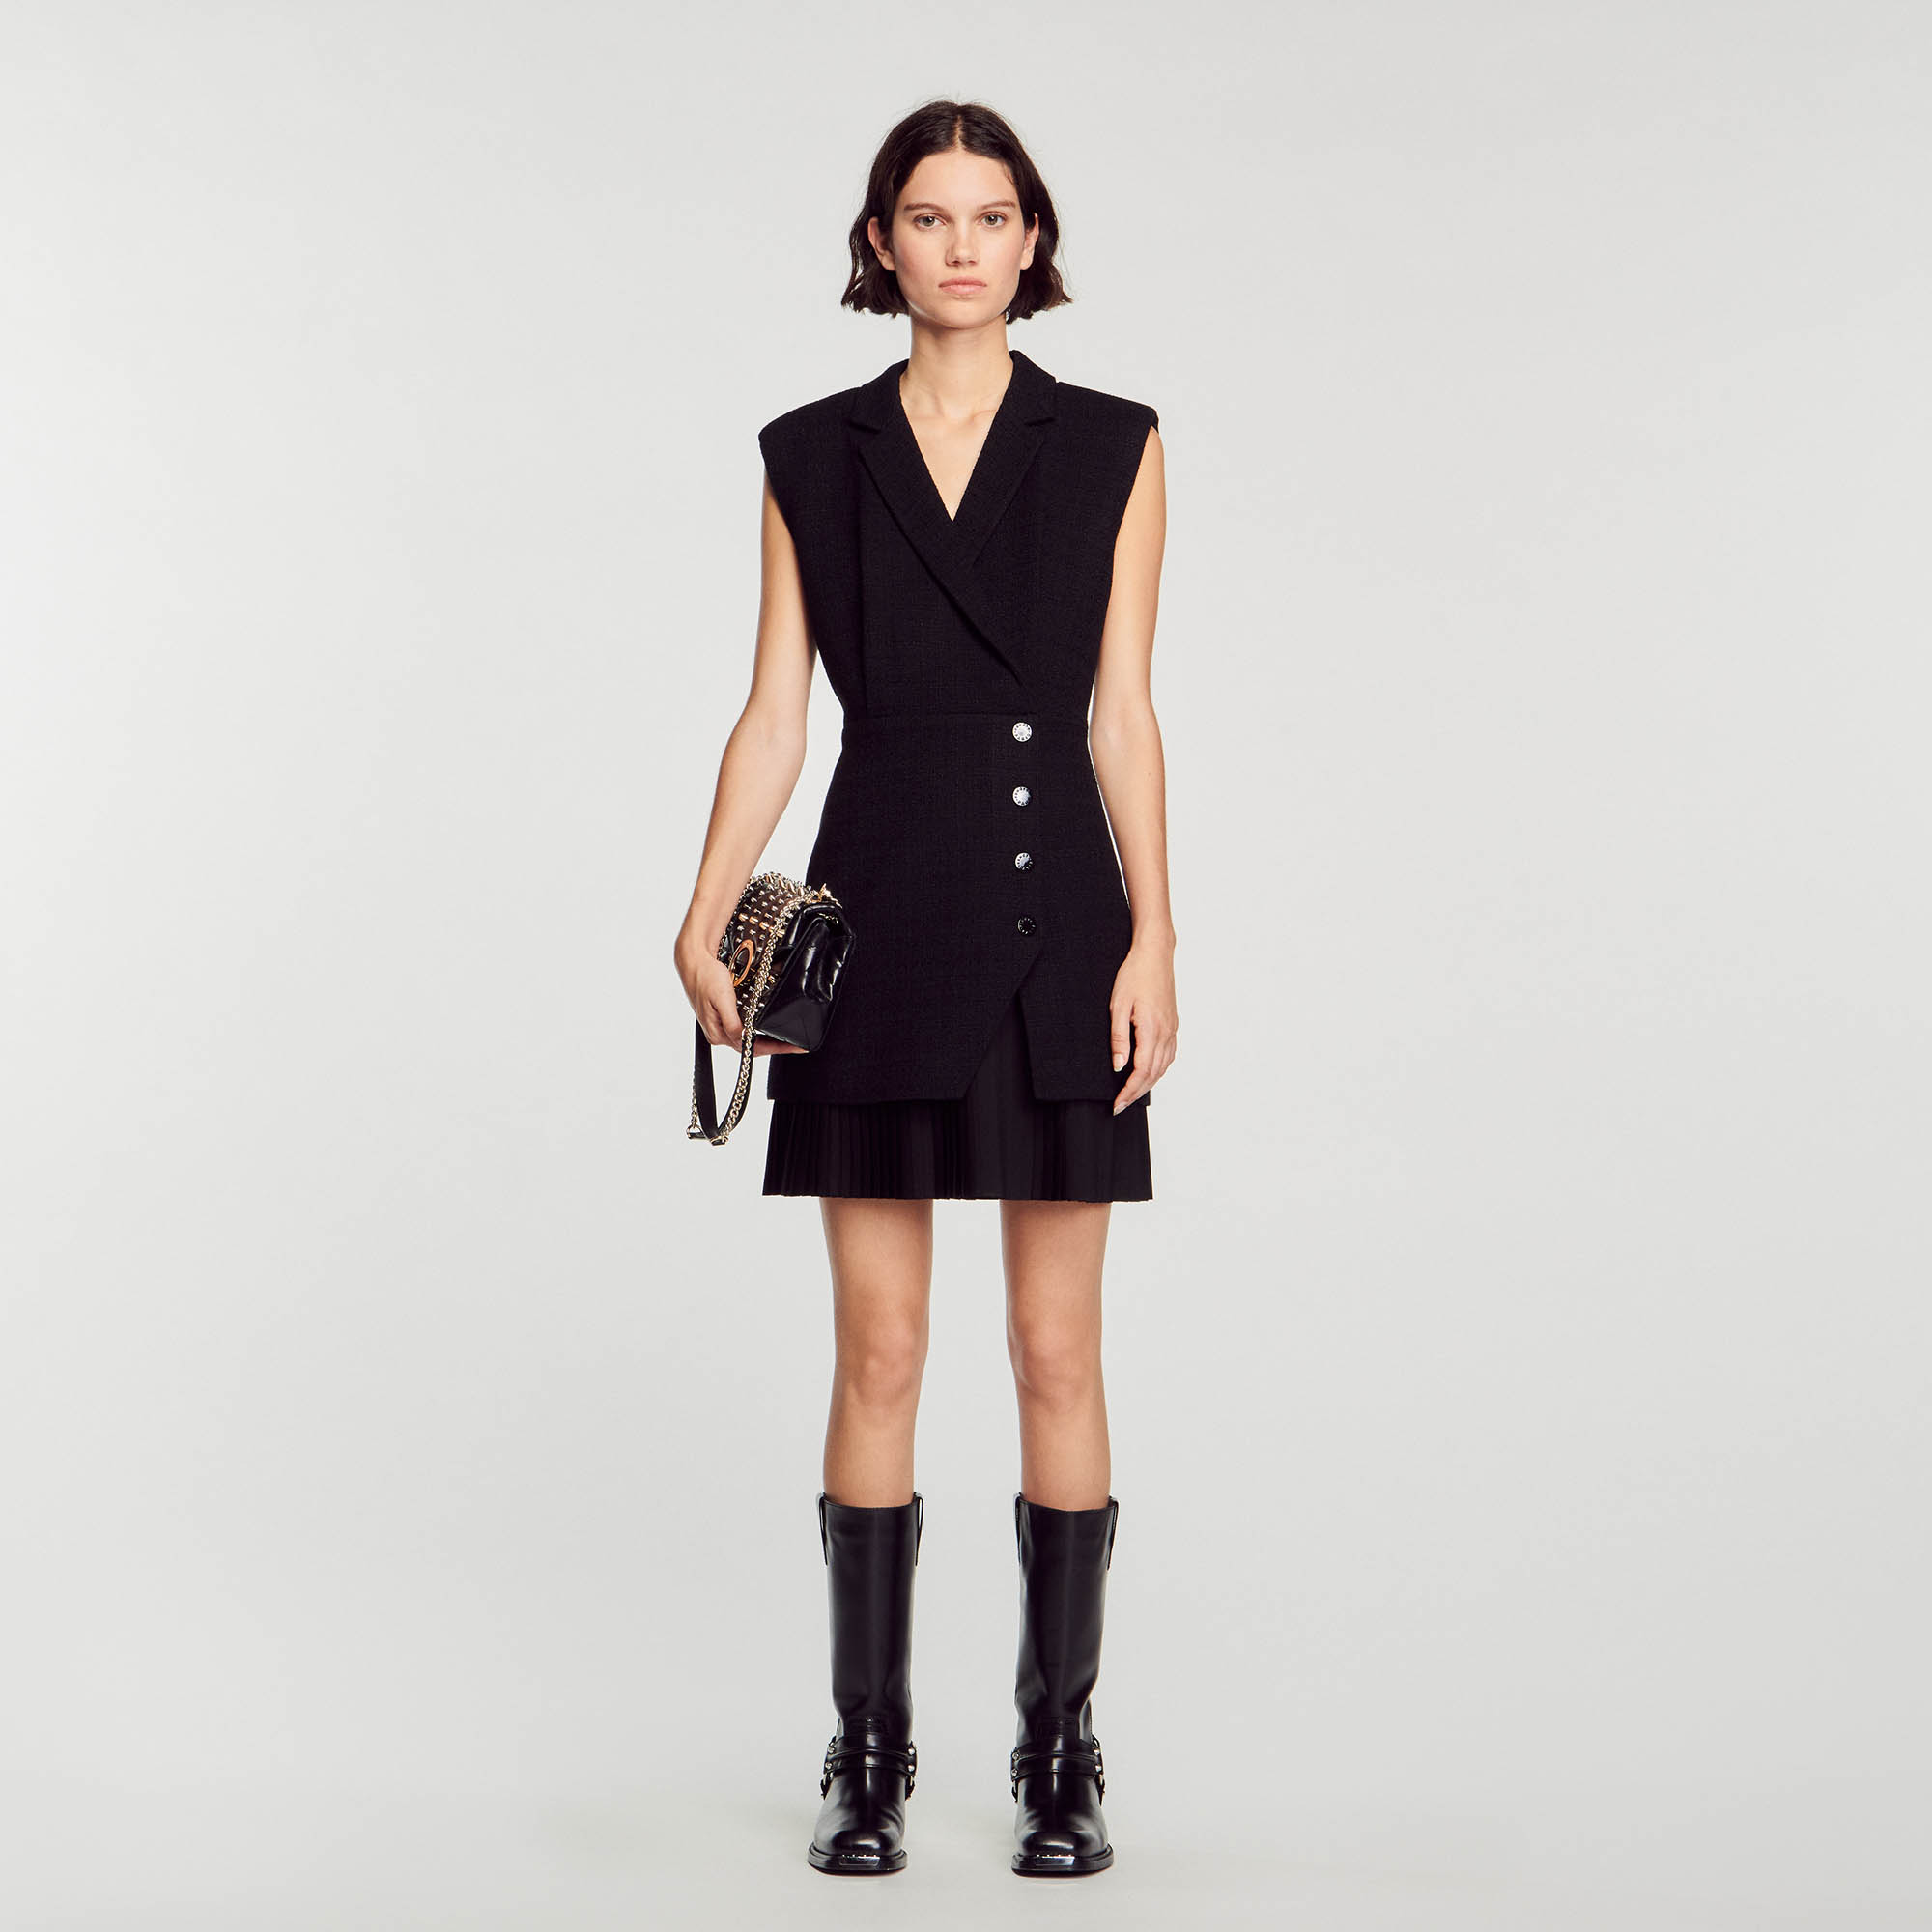 Sandro cotton Straight-cut sleeveless wrap dress in tweed with a jacket-style neckline, and a pleated layered skirt decorated with snap fasteners